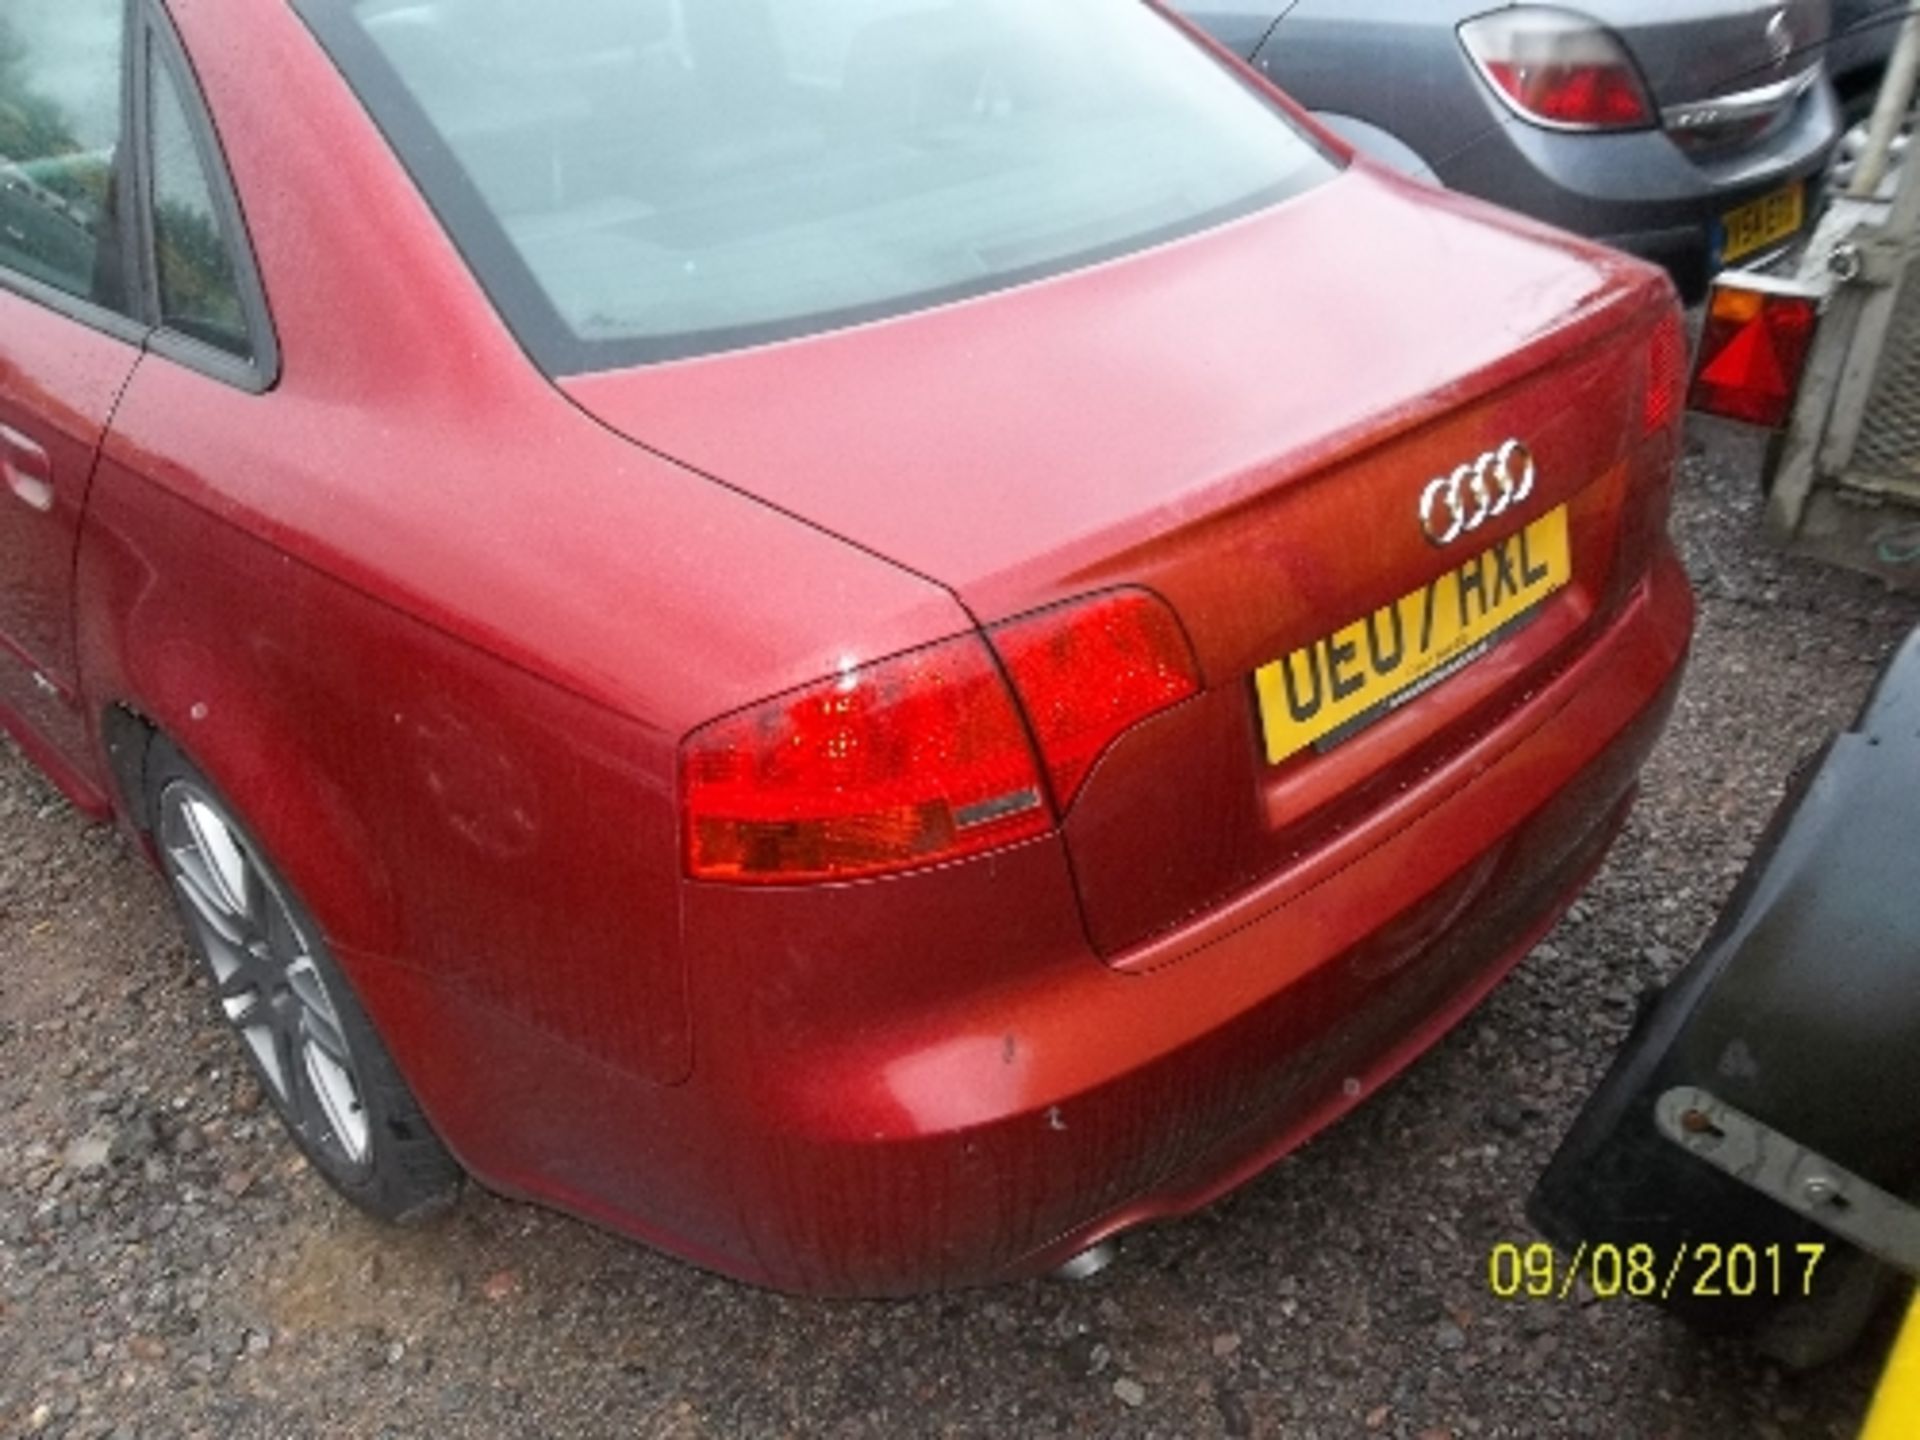 Audi A4 S Line SE TDI - OE07 HXL Date of registration: 05.06.2007 1986cc, diesel, manual, red - Image 4 of 5